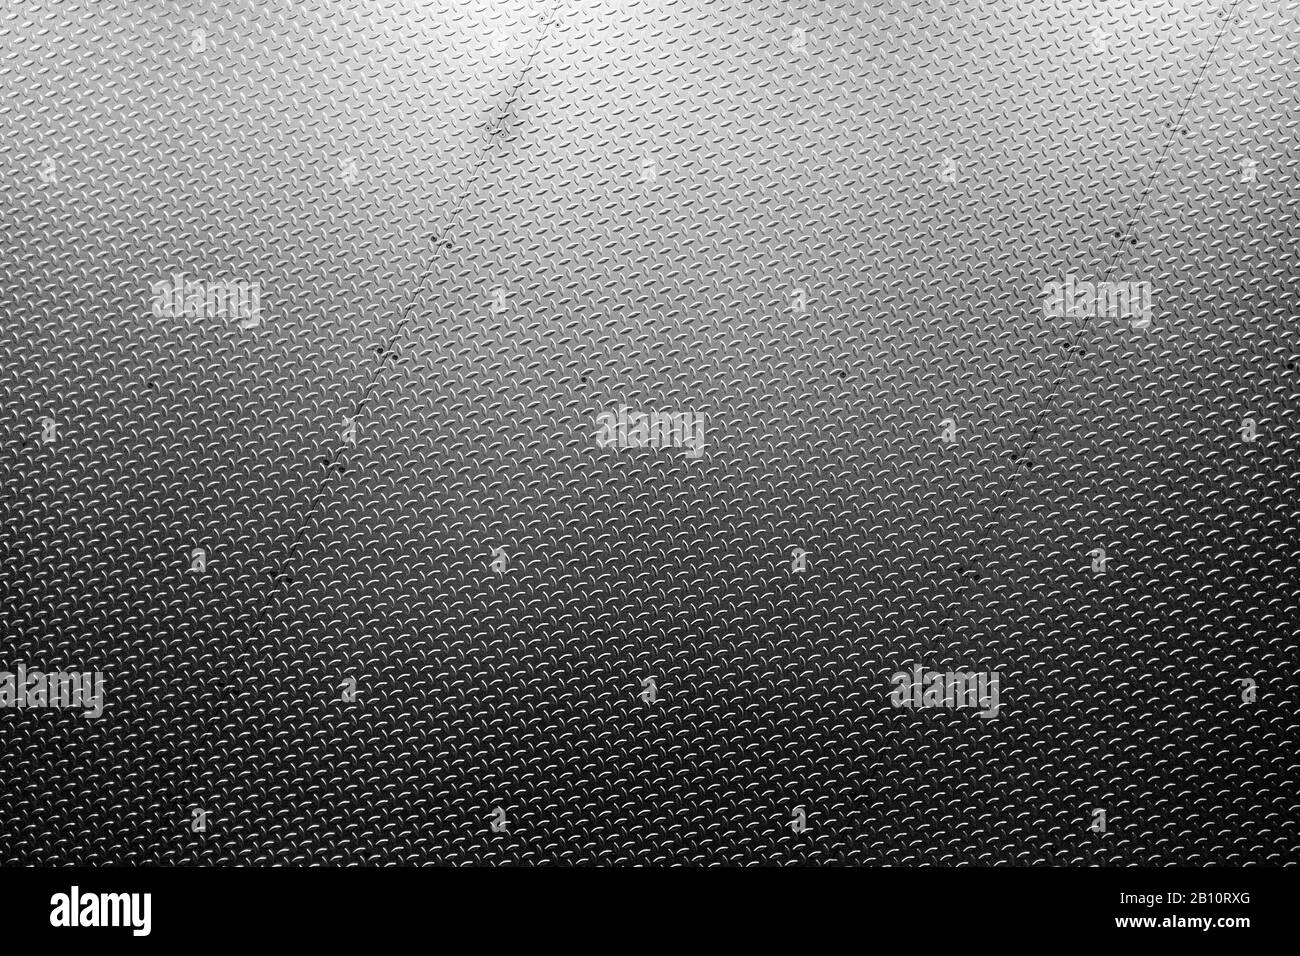 Sheet metal surface Black and White Stock Photos & Images - Alamy